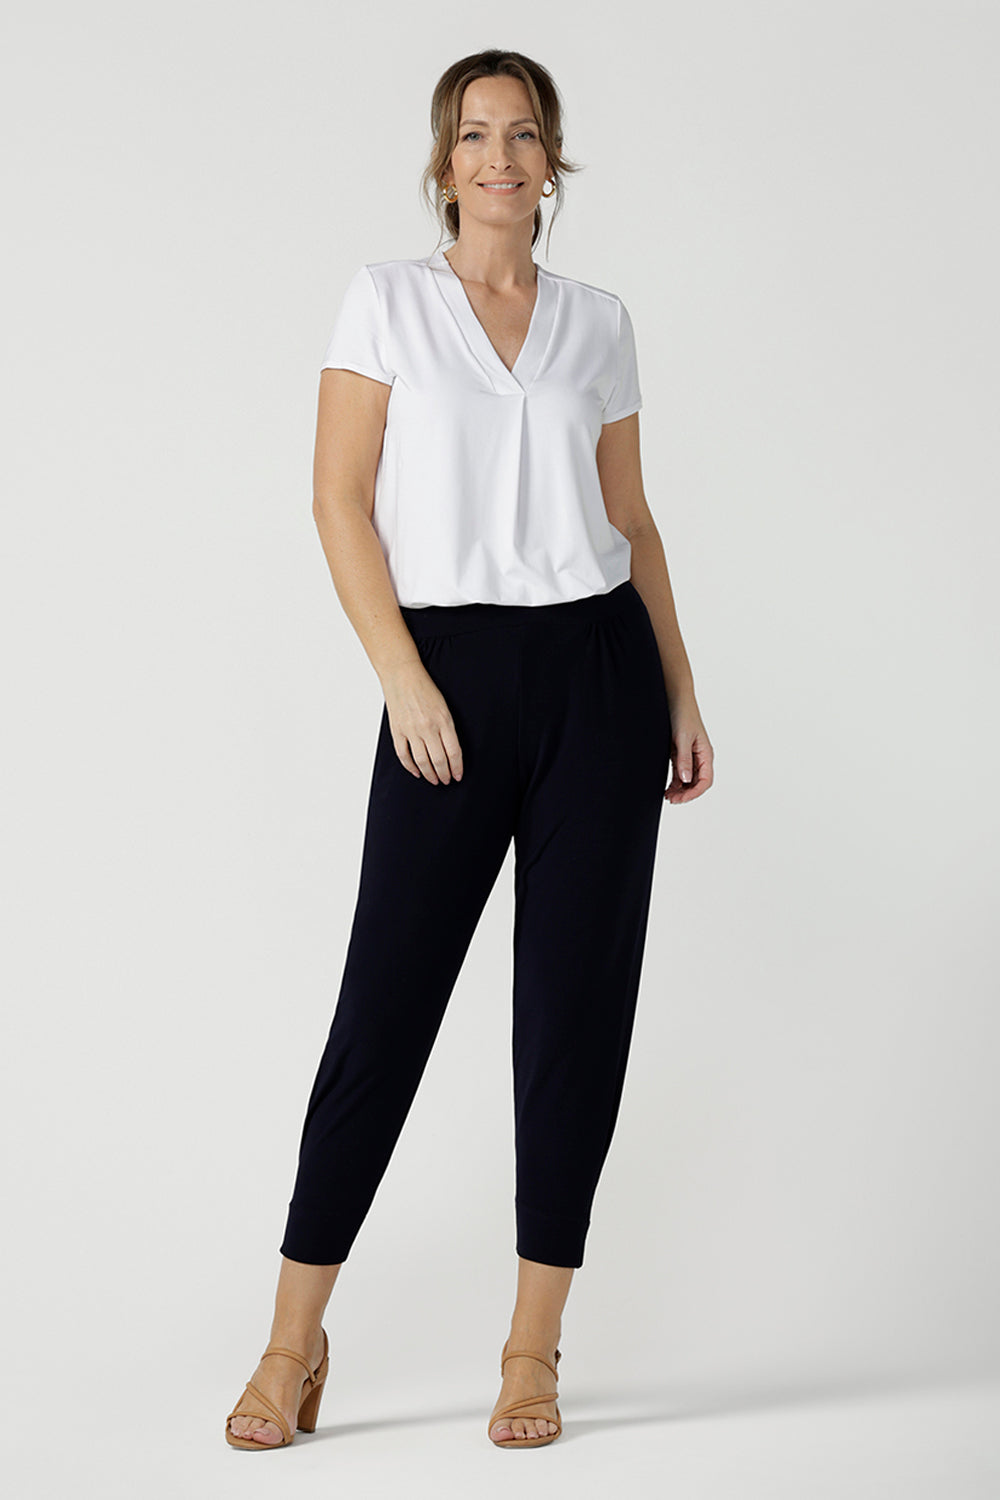 Great pants for travel, these dropped crotch, cropped leg, single seam navy pants are made stretchy jersey for ultimate comfort. Worn with white bamboo jersey top , shop these comfy navy pants for your travel and capsule wardrobe now!